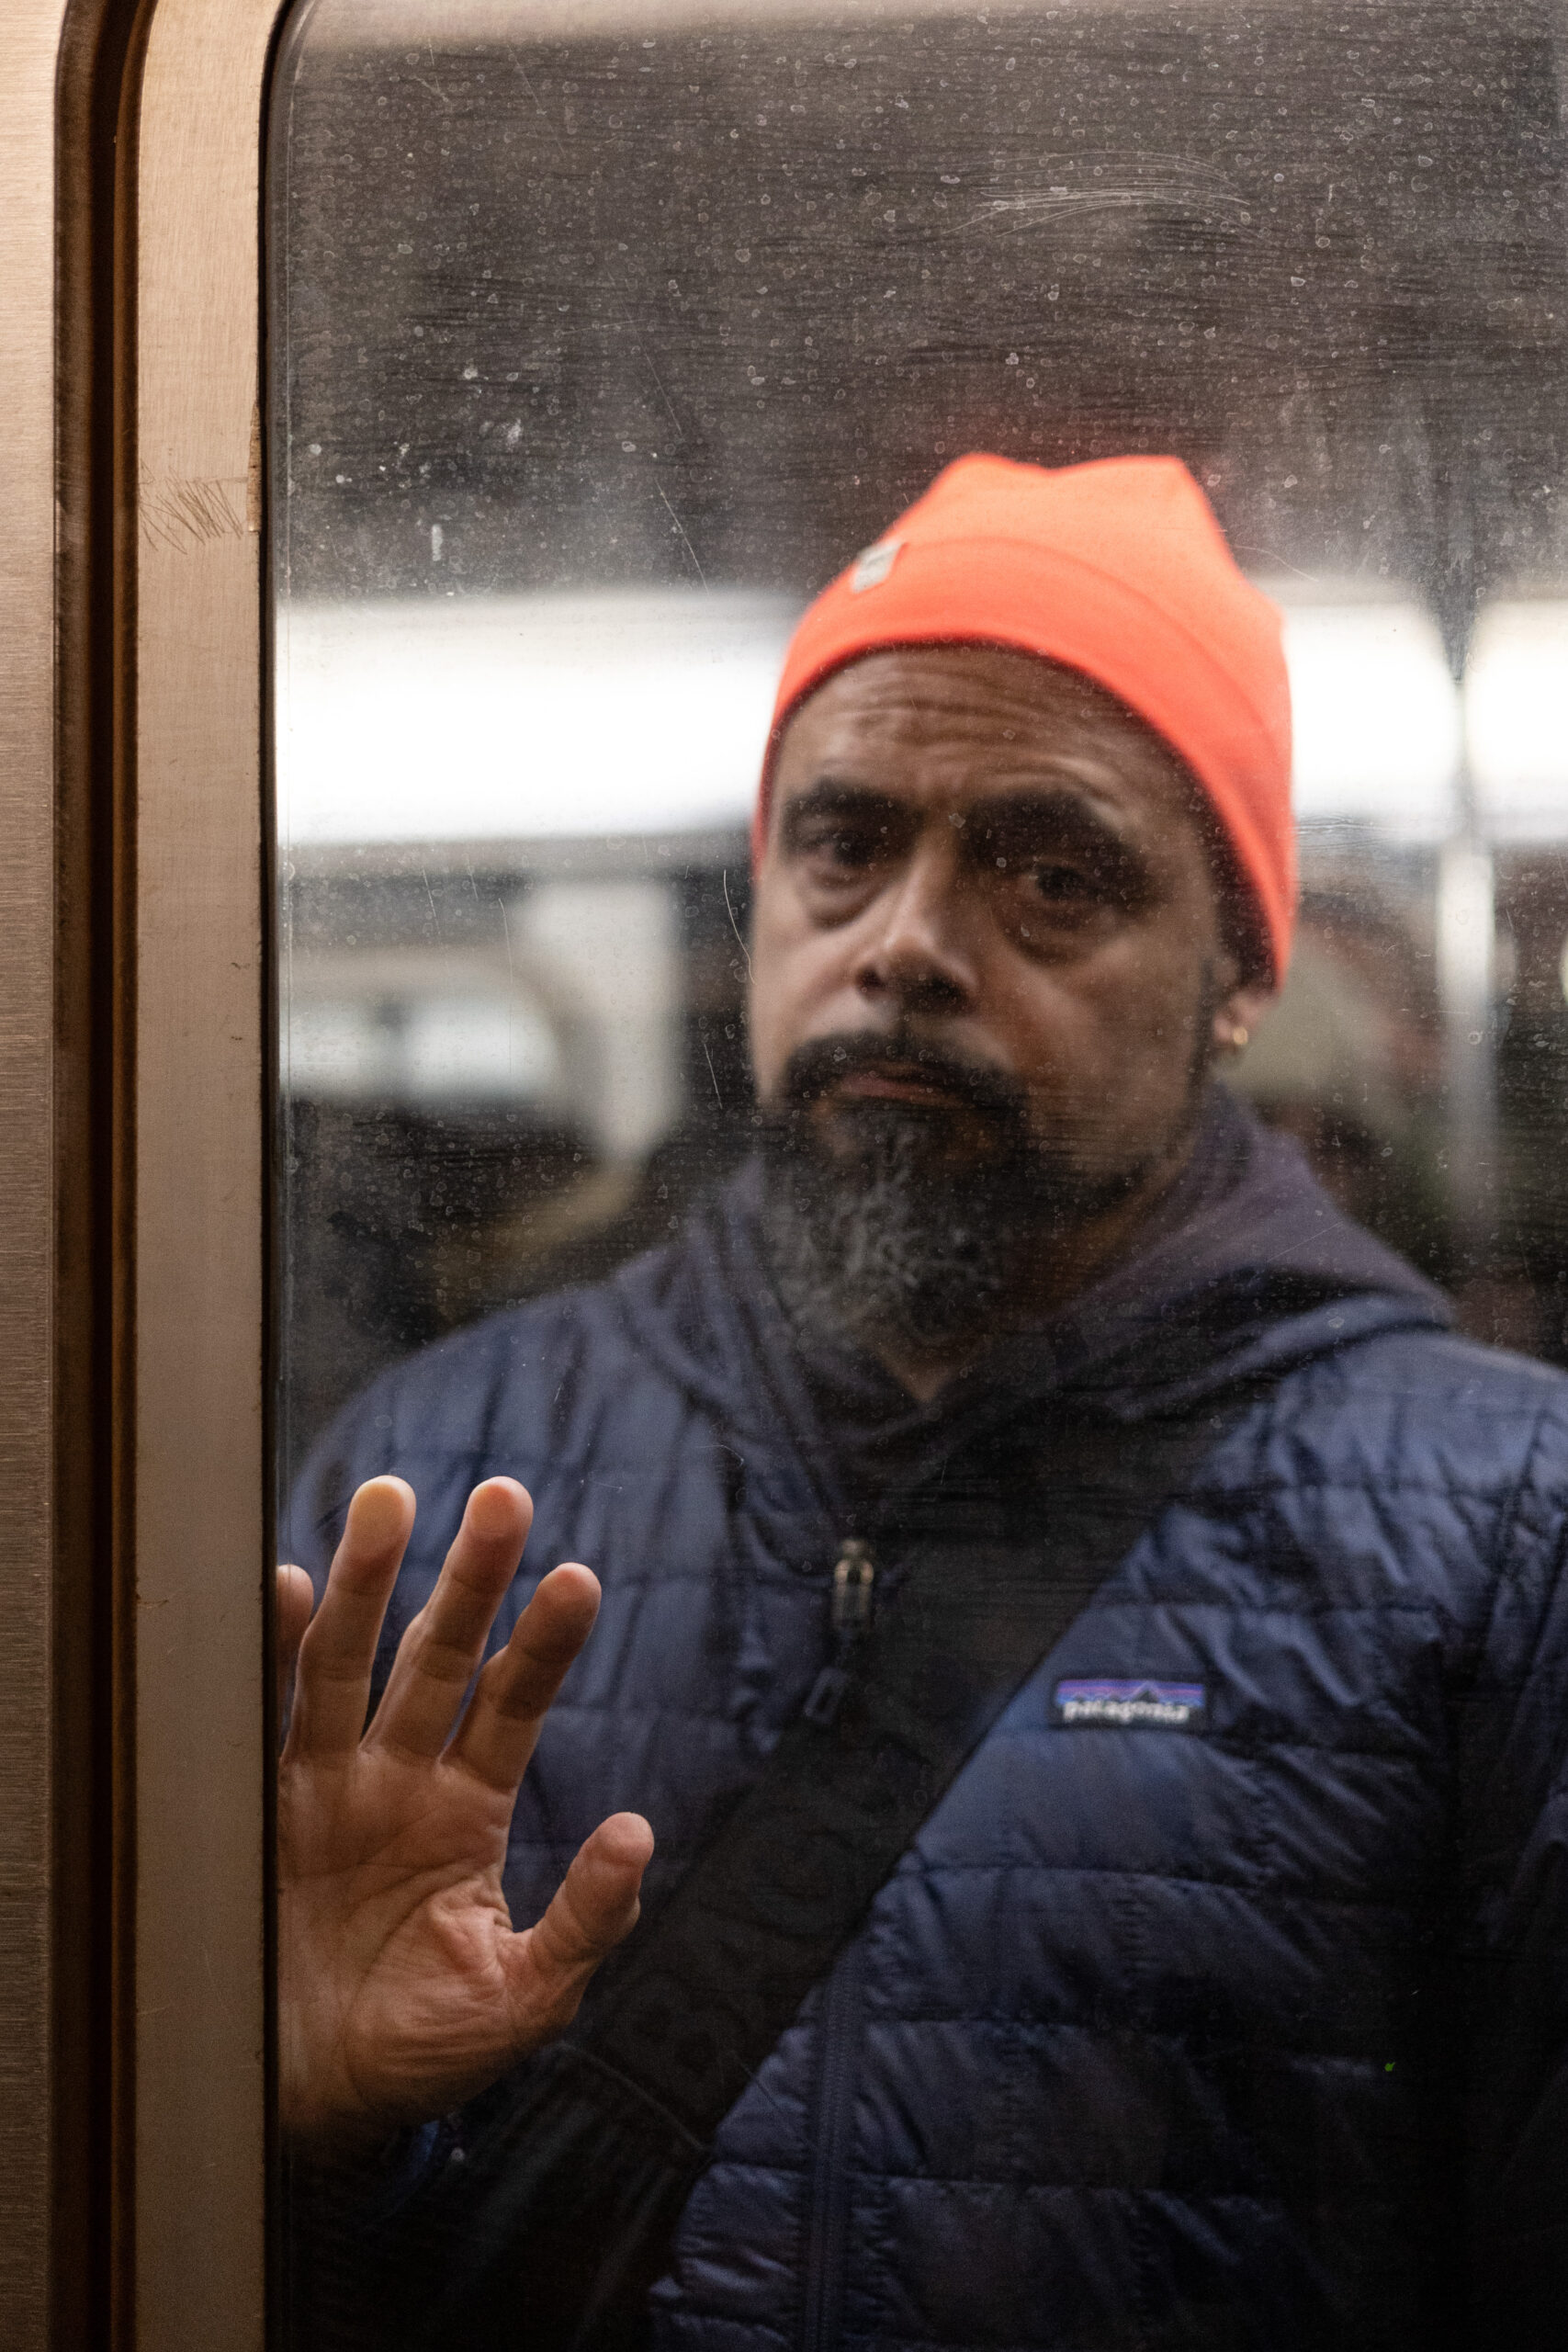 A bearded man presses his fingertips against the glass of the subway door. He is making eye contact and his eyebrows are raised though there is no expression on his face. He is wearing a bright orange toque and a dark blue jacket. The image is framed by stripes of metal and rubber going down the left side of the image. 